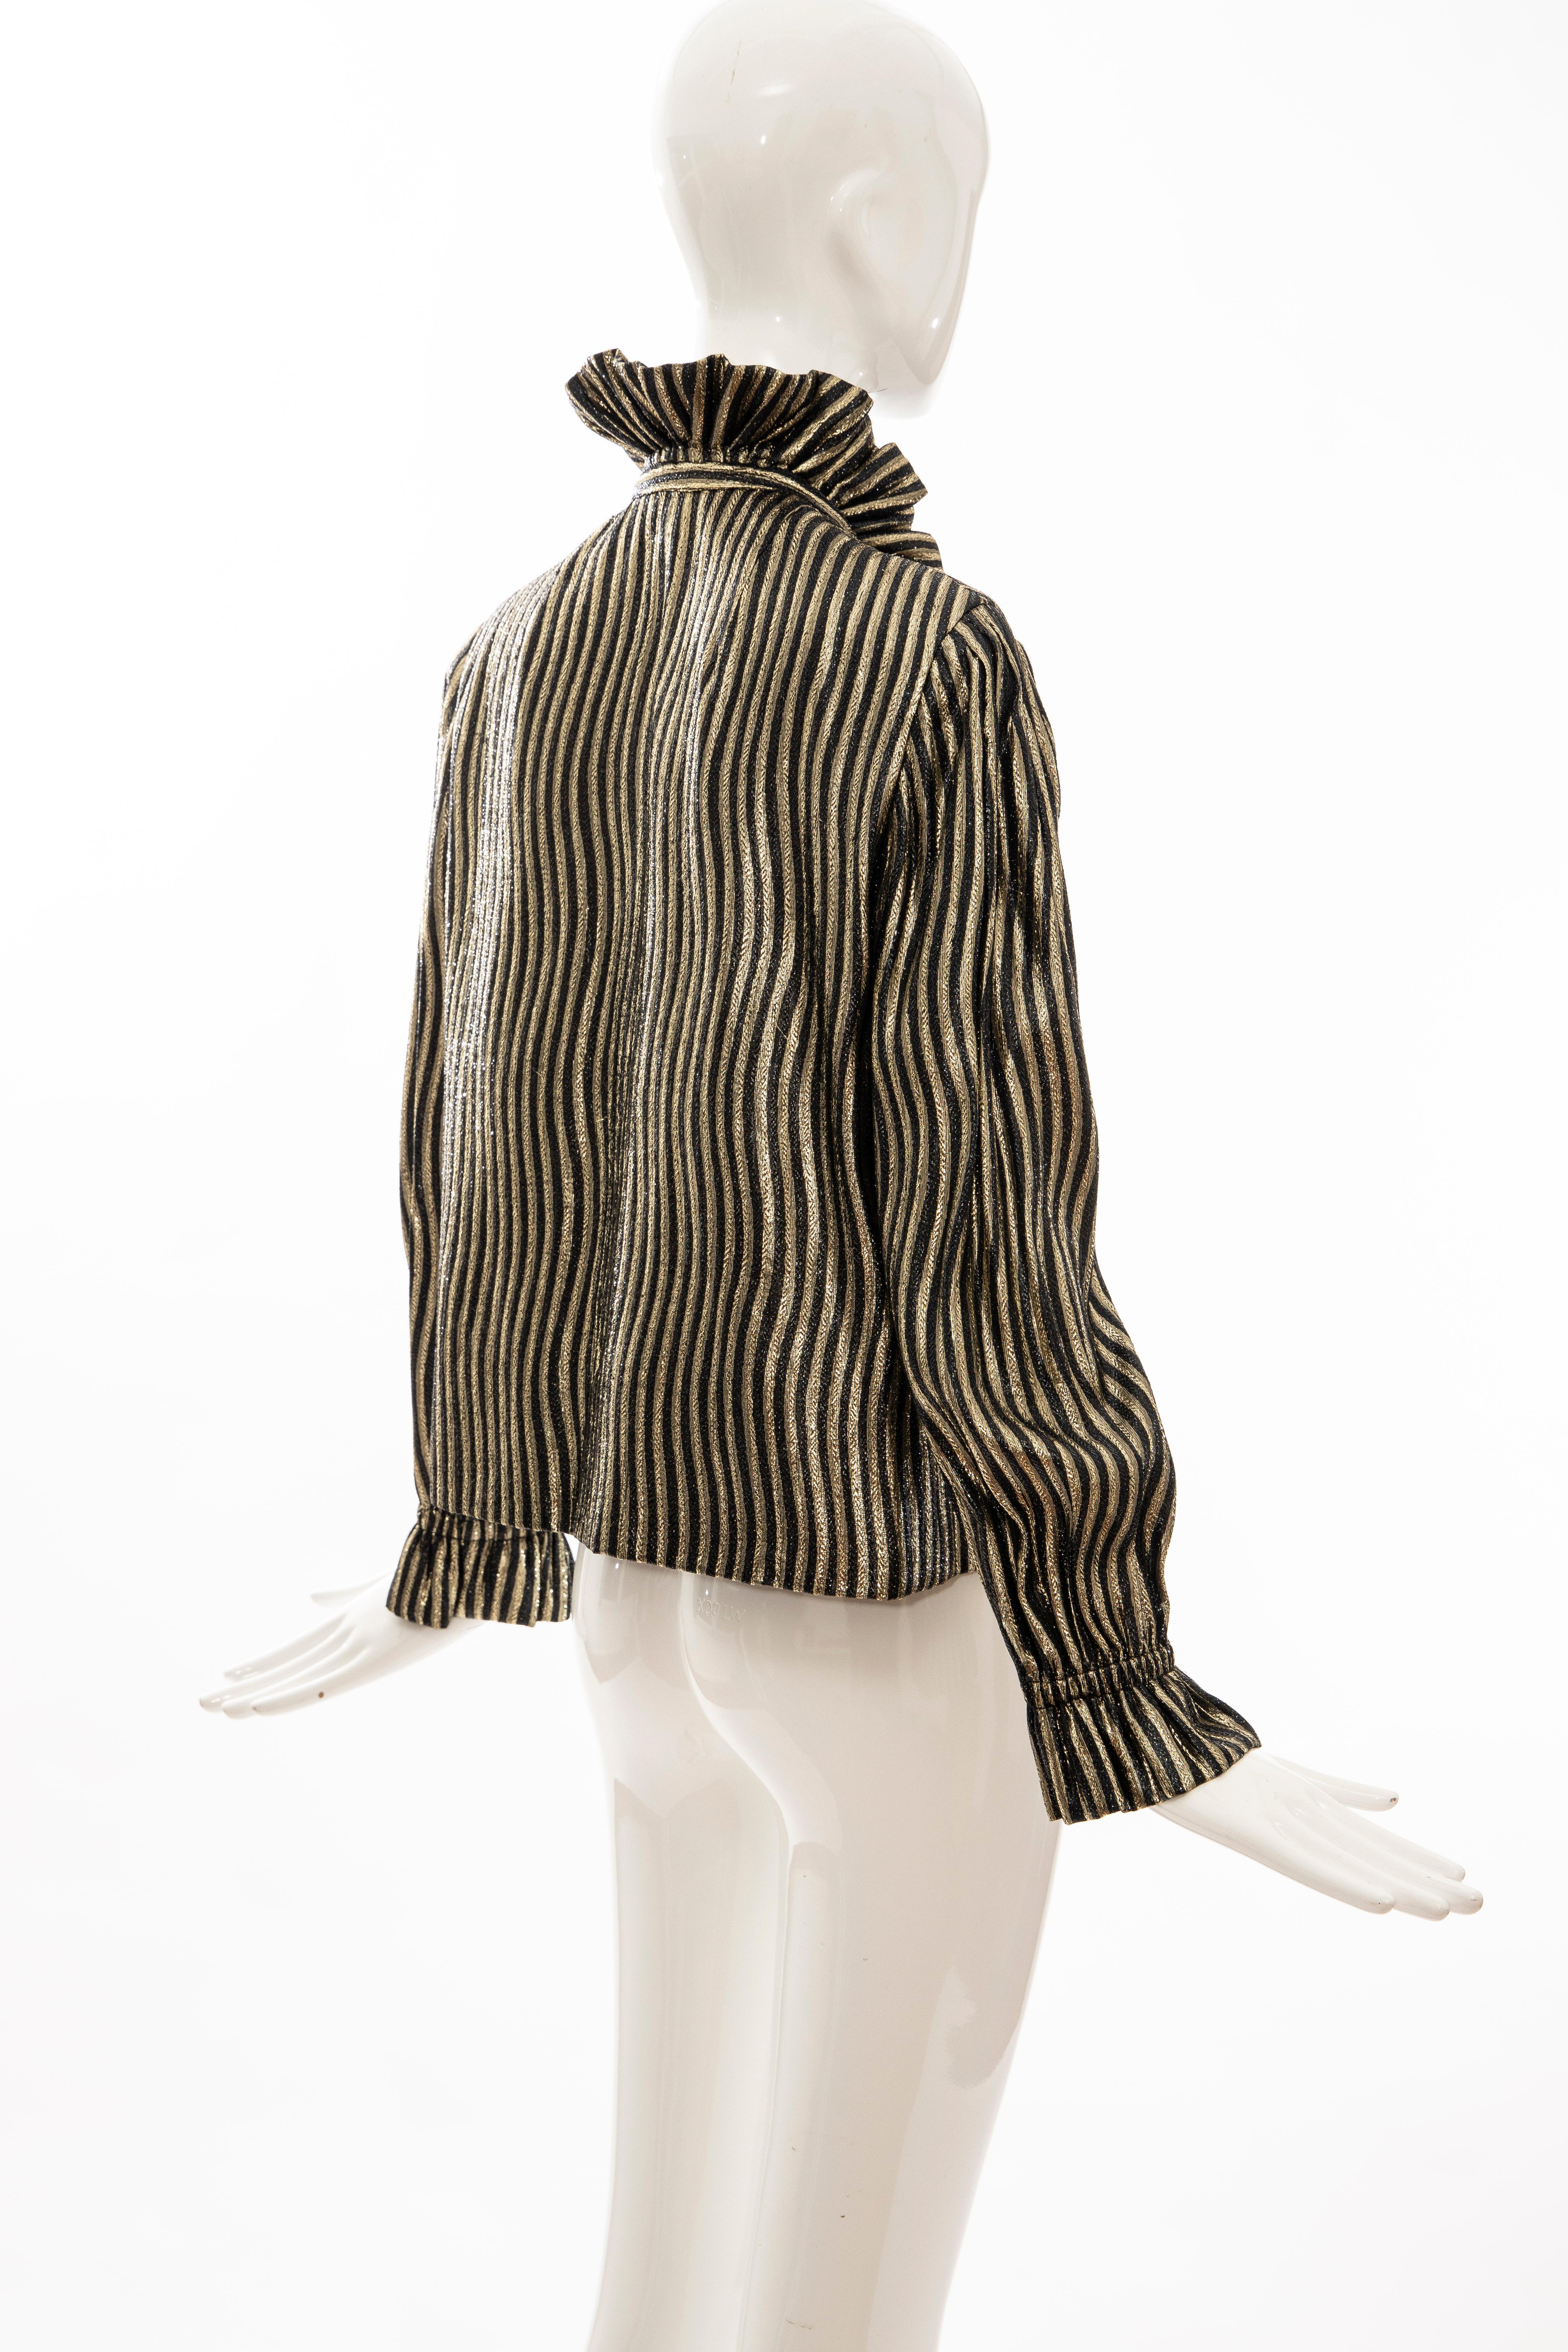 Pauline Trigere Black Gold Striped Metallic Snap Front Blouse, Circa: 1970's For Sale 4